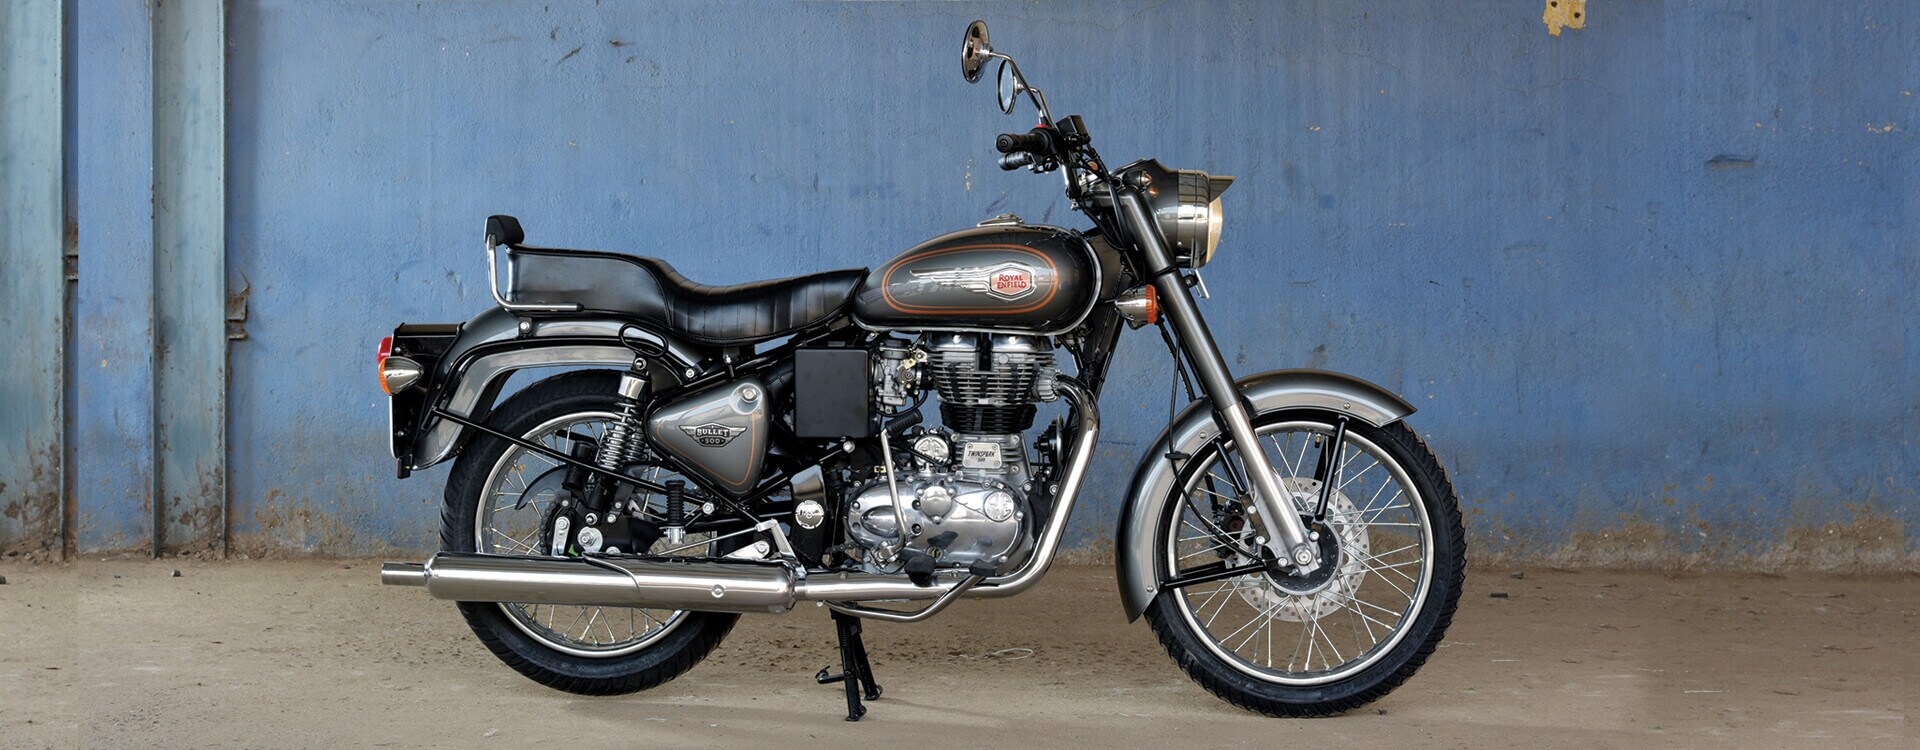 Bullet 500 - Colours, Specifications, Reviews, Gallery| Royal Enfield